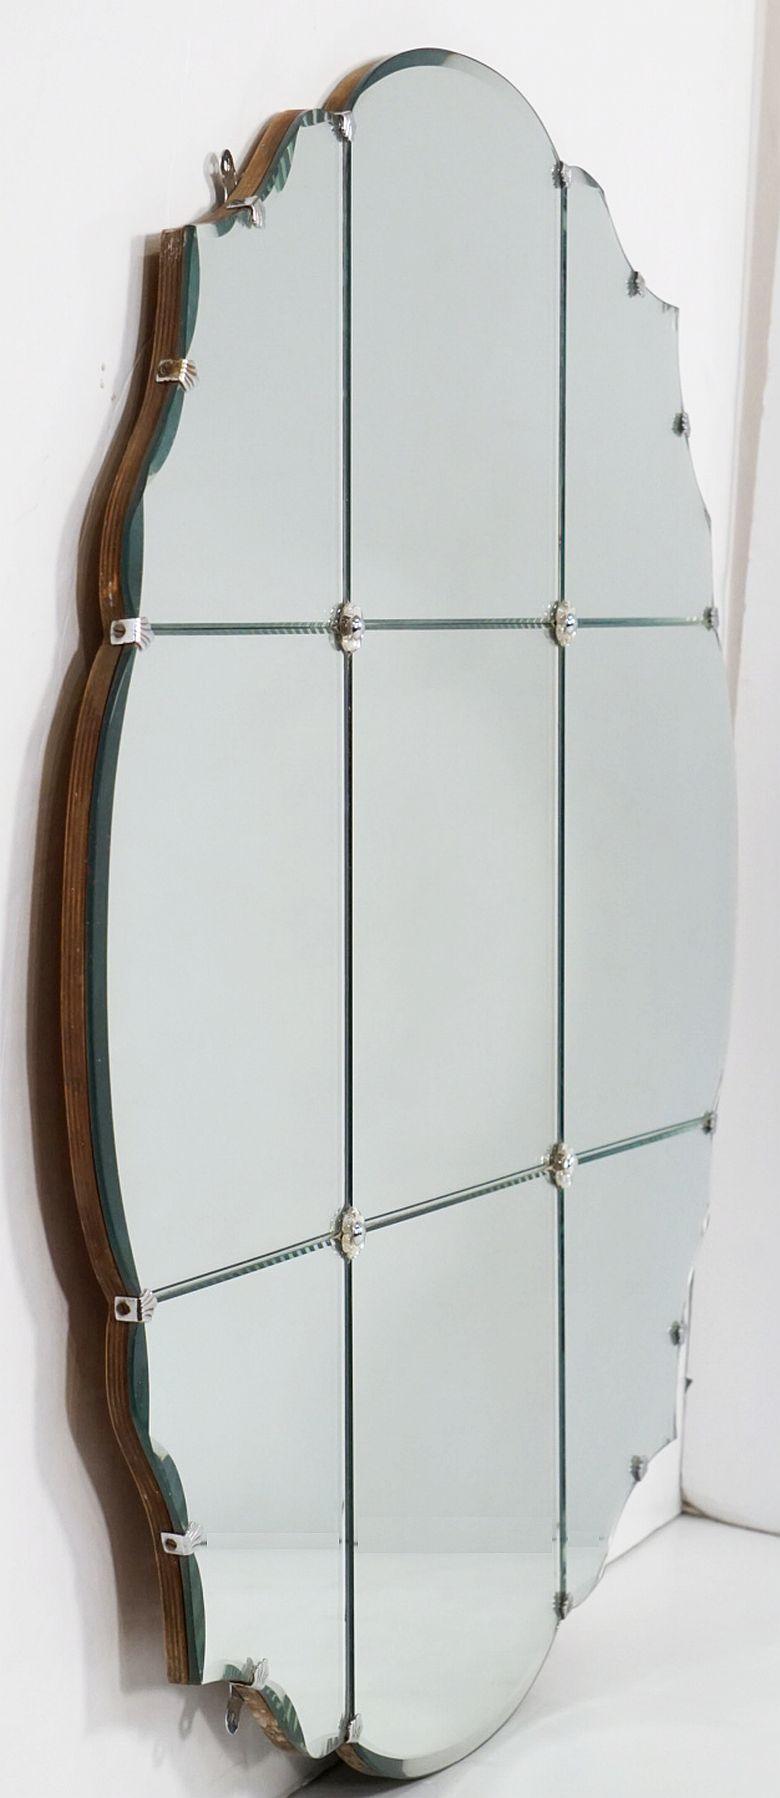 Edwardian Round Paneled Scalloped Edge Mirror with Beveled Glass from England (Dia 37 3/4) For Sale